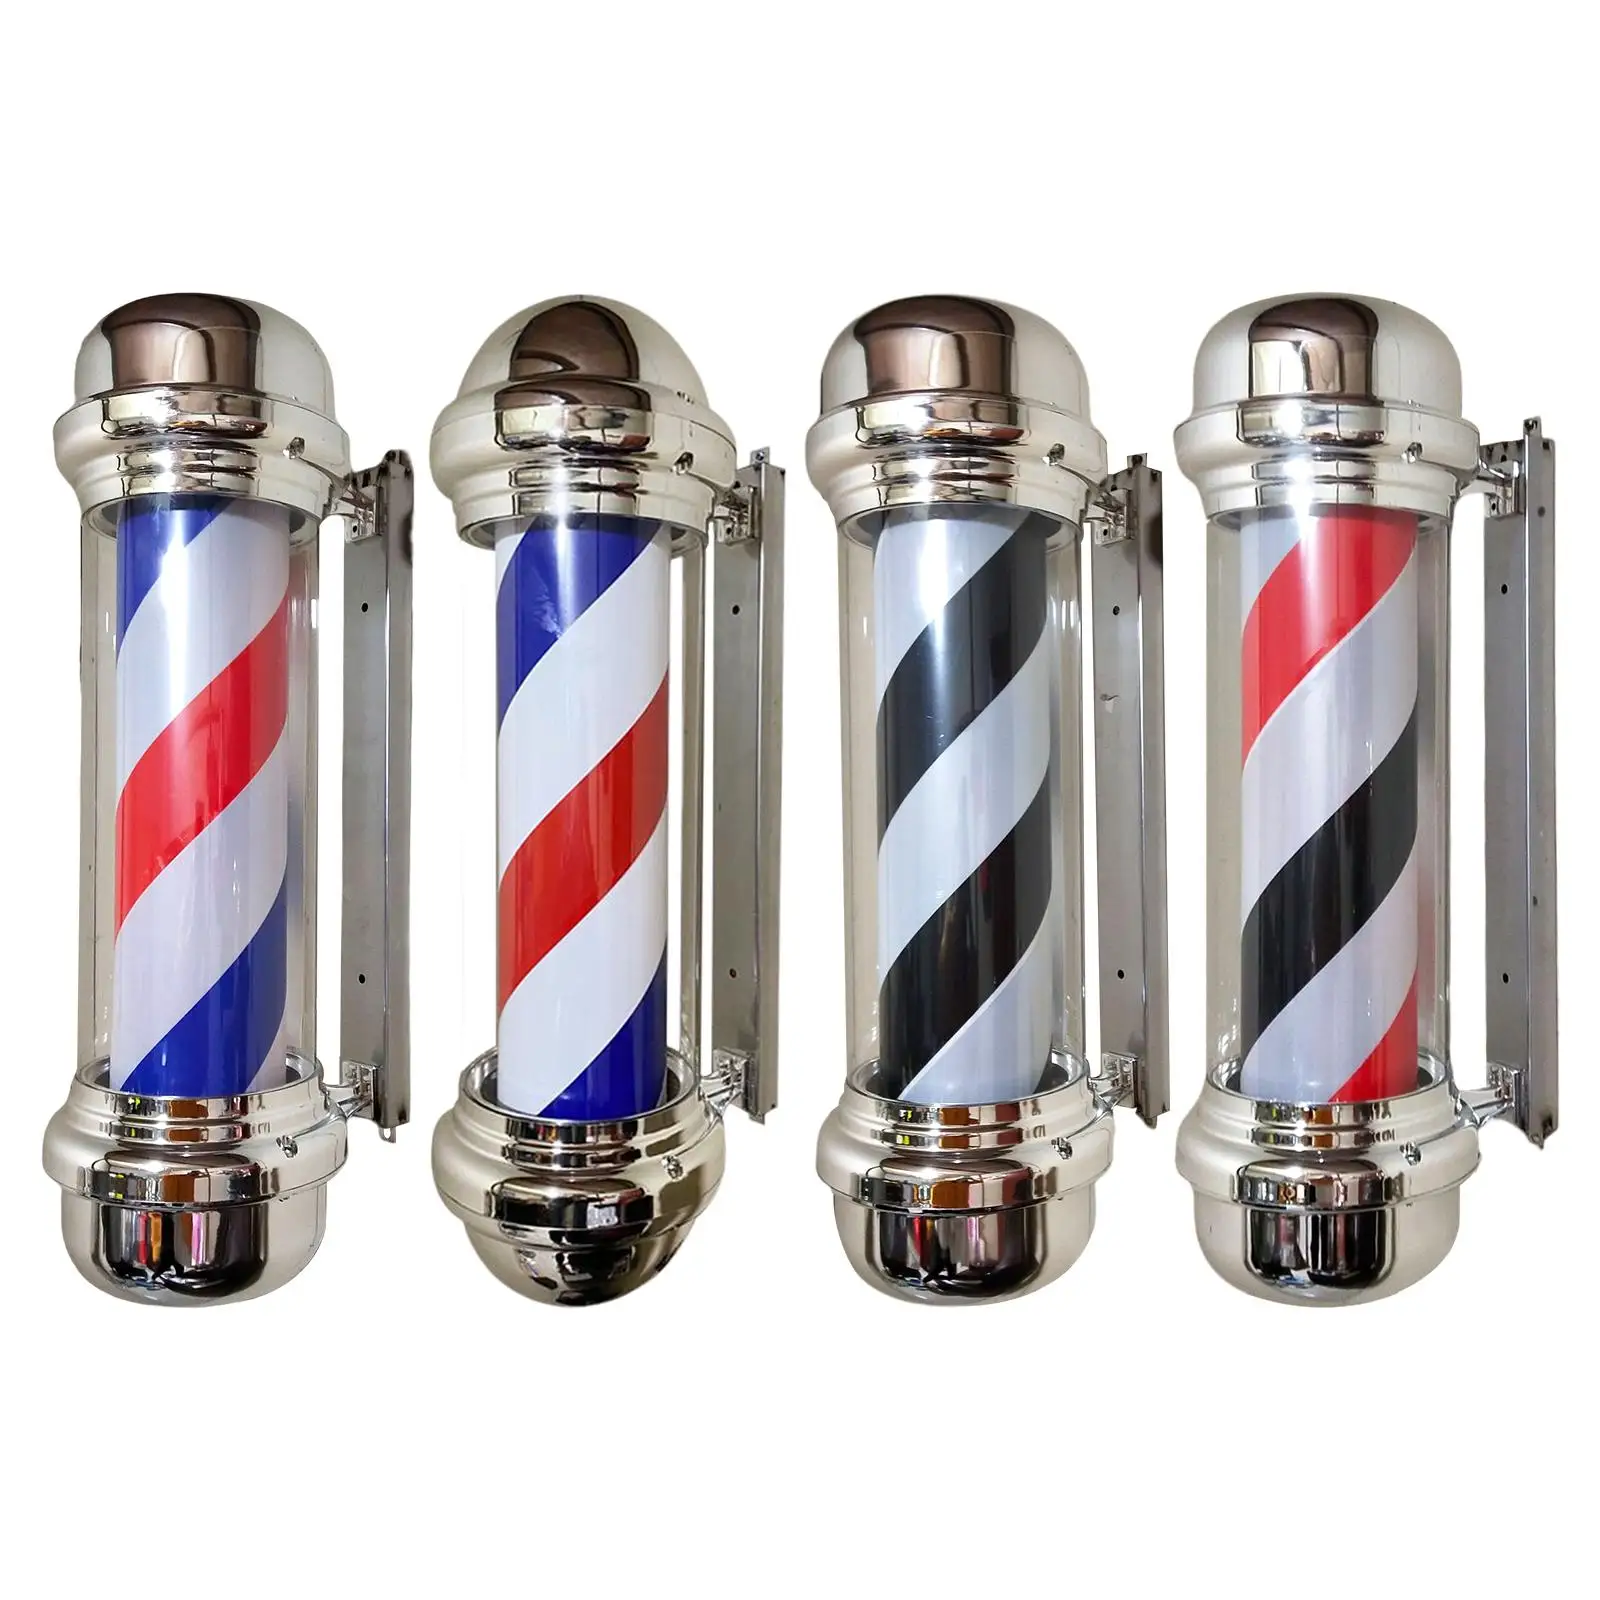 Barber Pole Light Save Energy 23`` Classic Wall Mount Lamp Hair Salon Open Sign Barber Shop Rotating Light for Indoor Outdoor